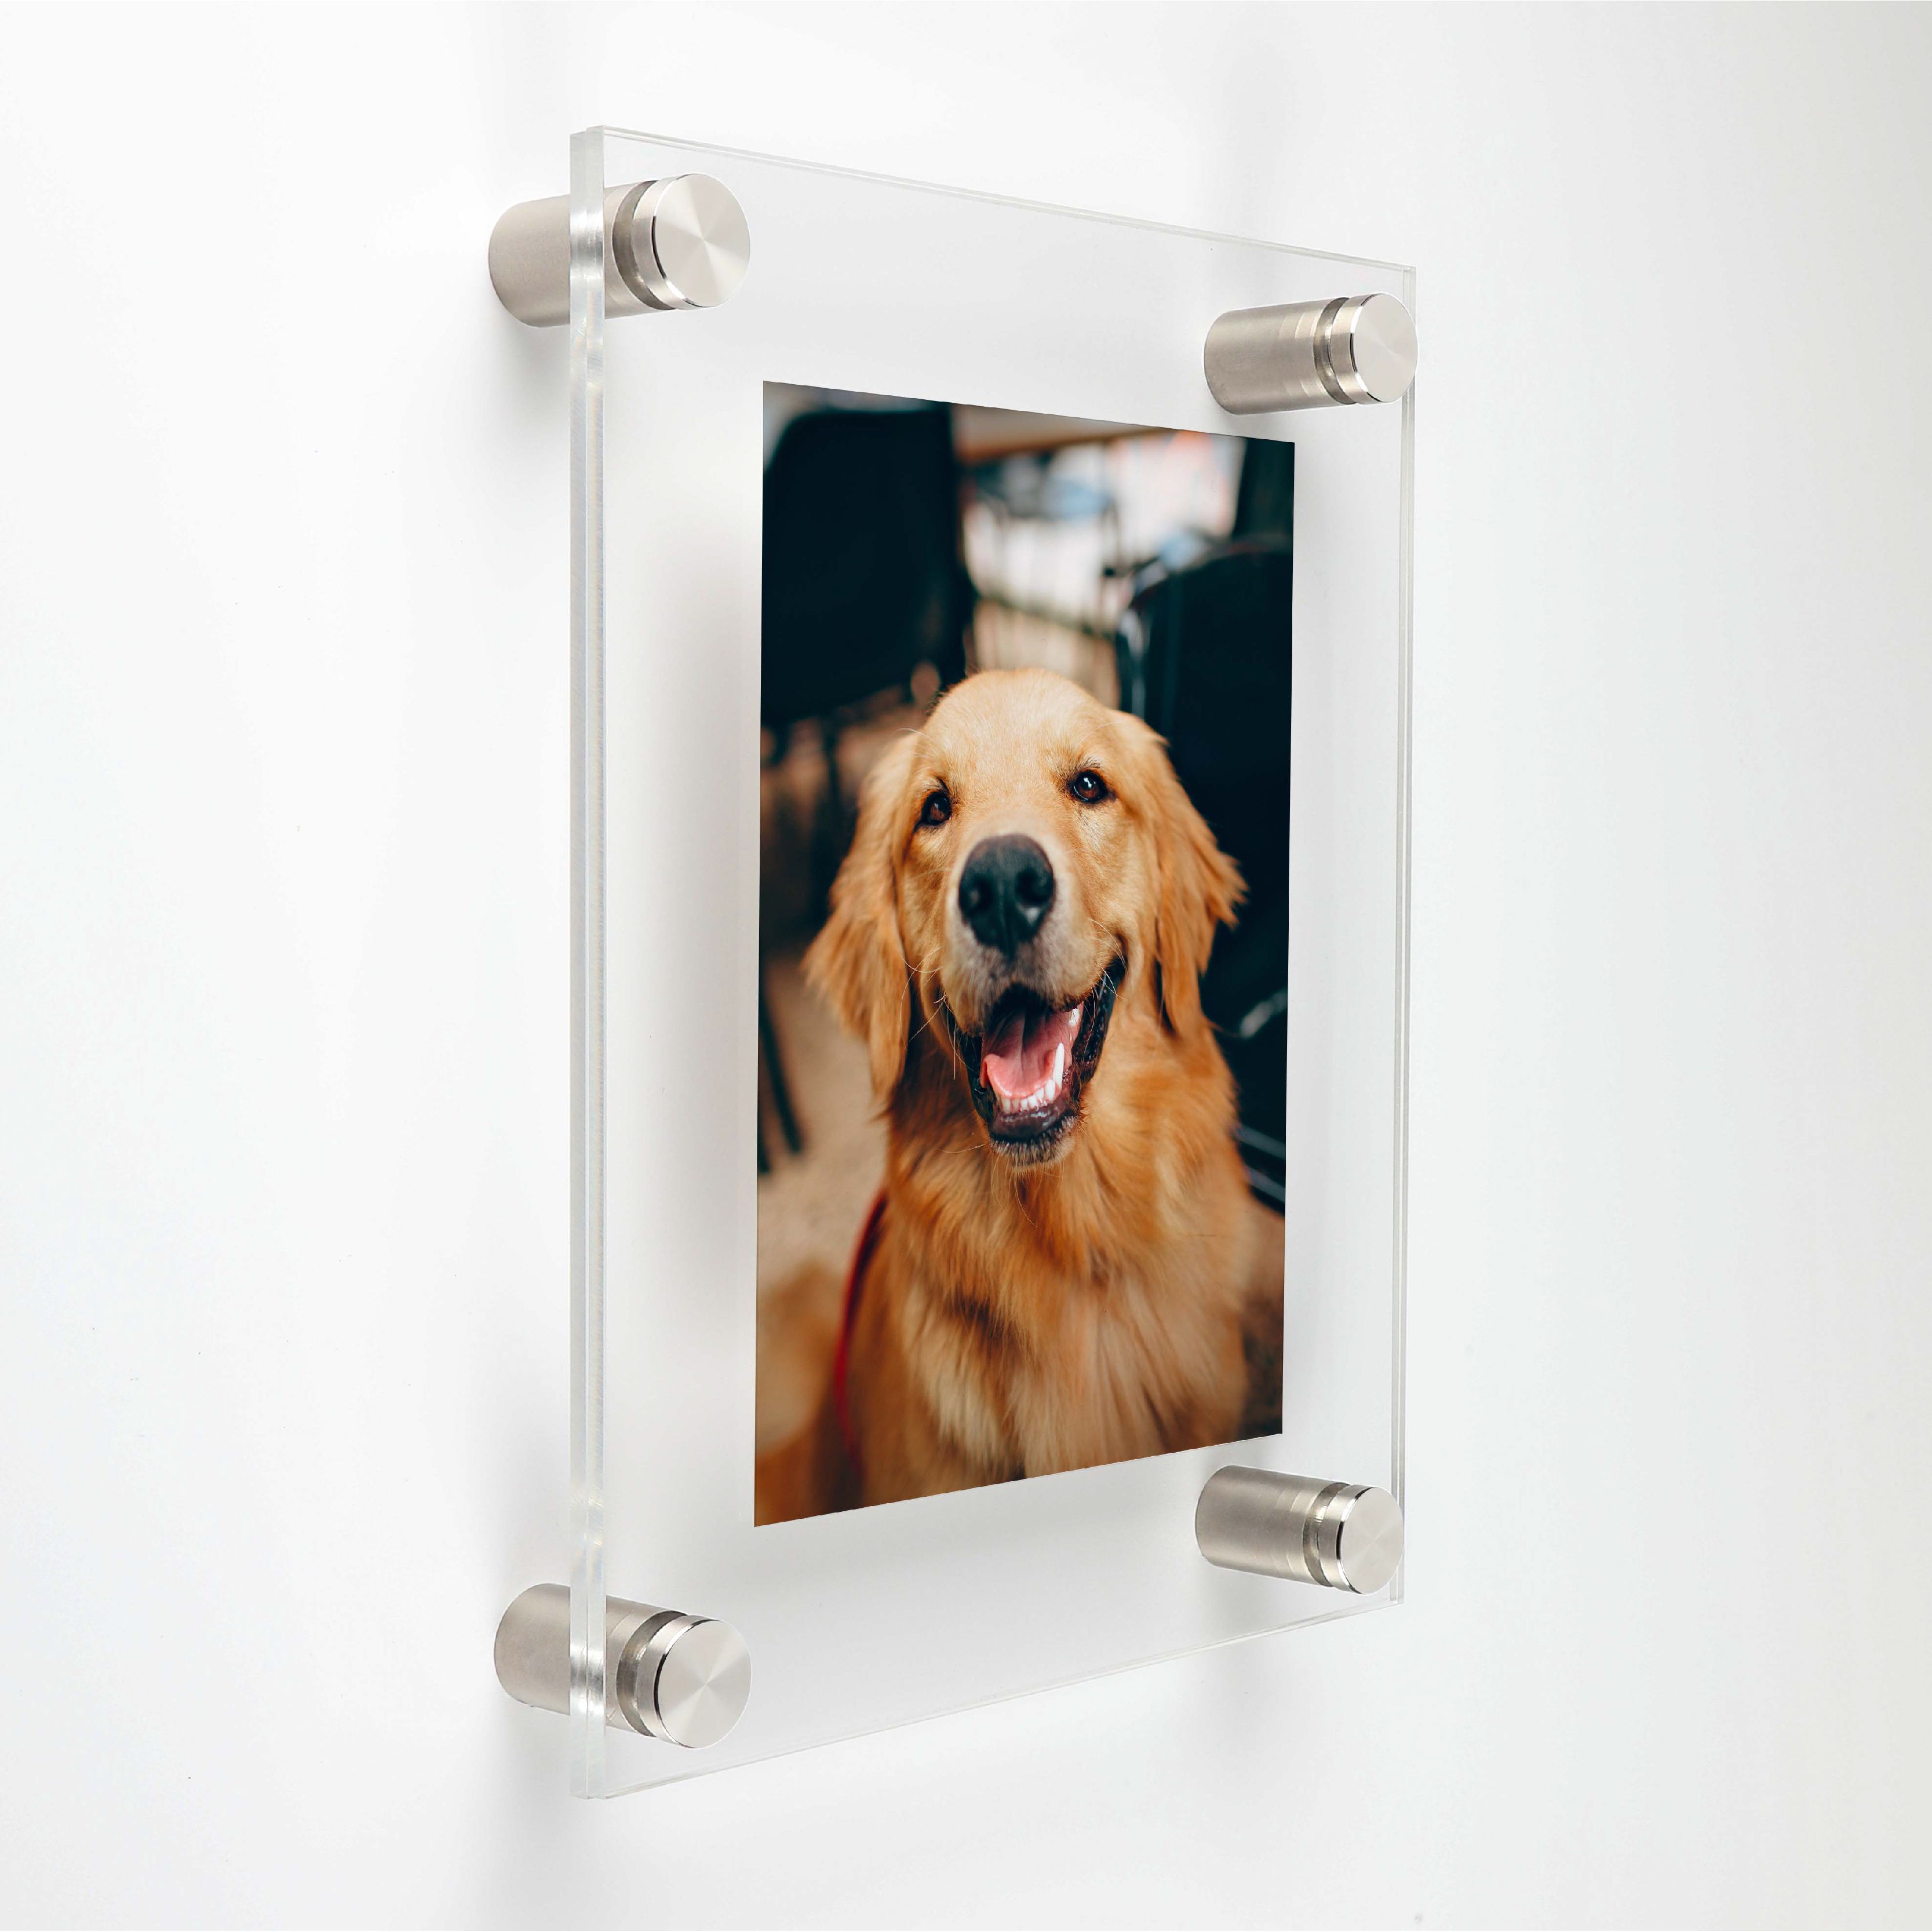 (2) 13-1/2'' x 19-1/2'' Clear Acrylics , Pre-Drilled With Polished Edges (Thick 3/16'' each), Wall Frame with (4) 3/4'' x 1'' Brushed Stainless Steel Standoffs includes Screws and Anchors